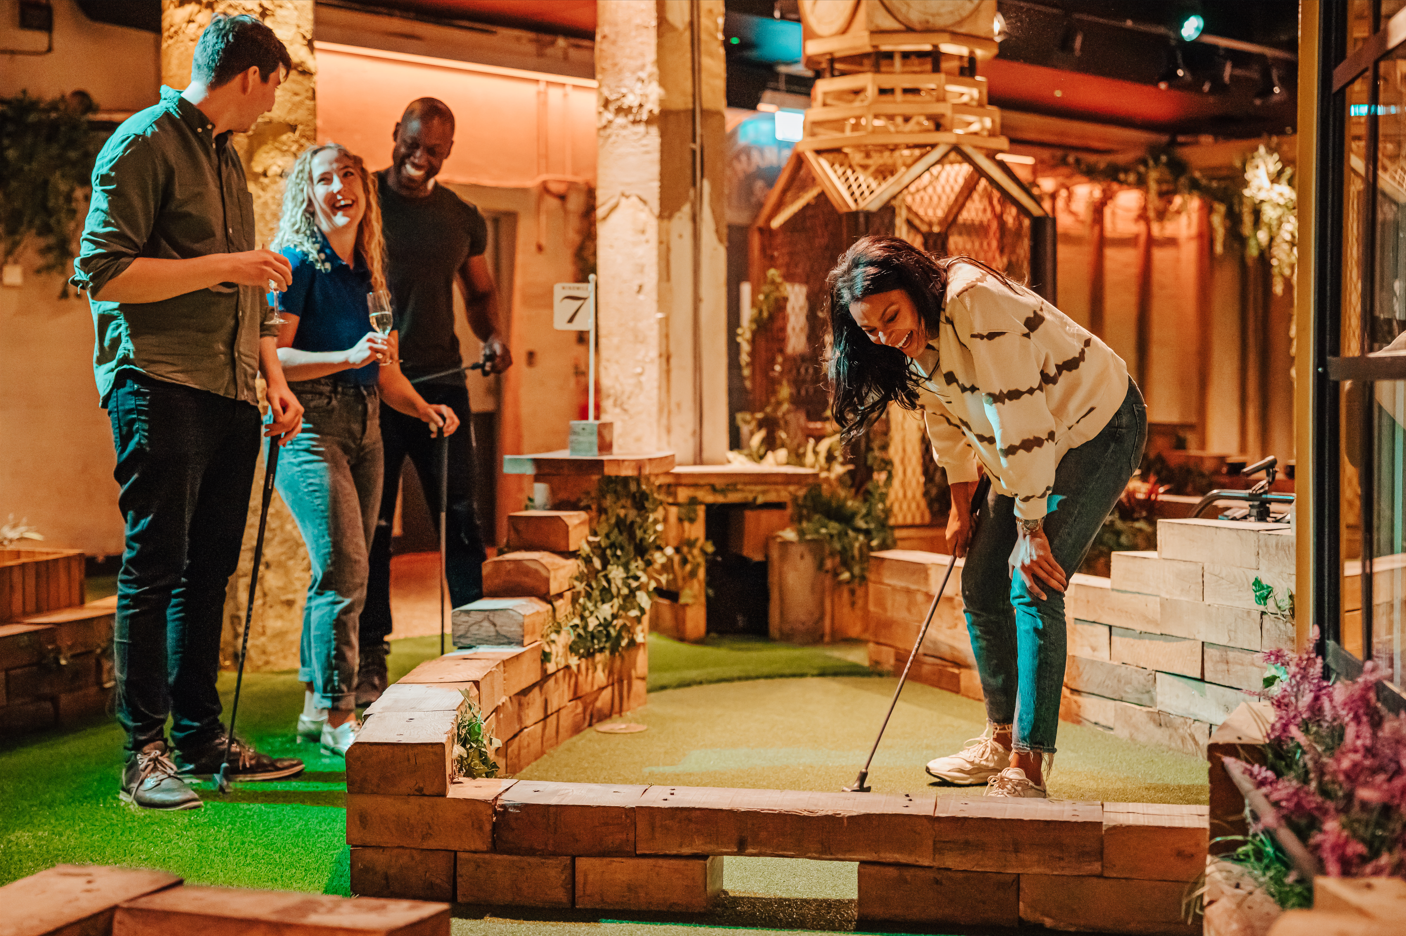 Two men and two women laugh with one another on the crazy golf course, as one of the women putts her ball.